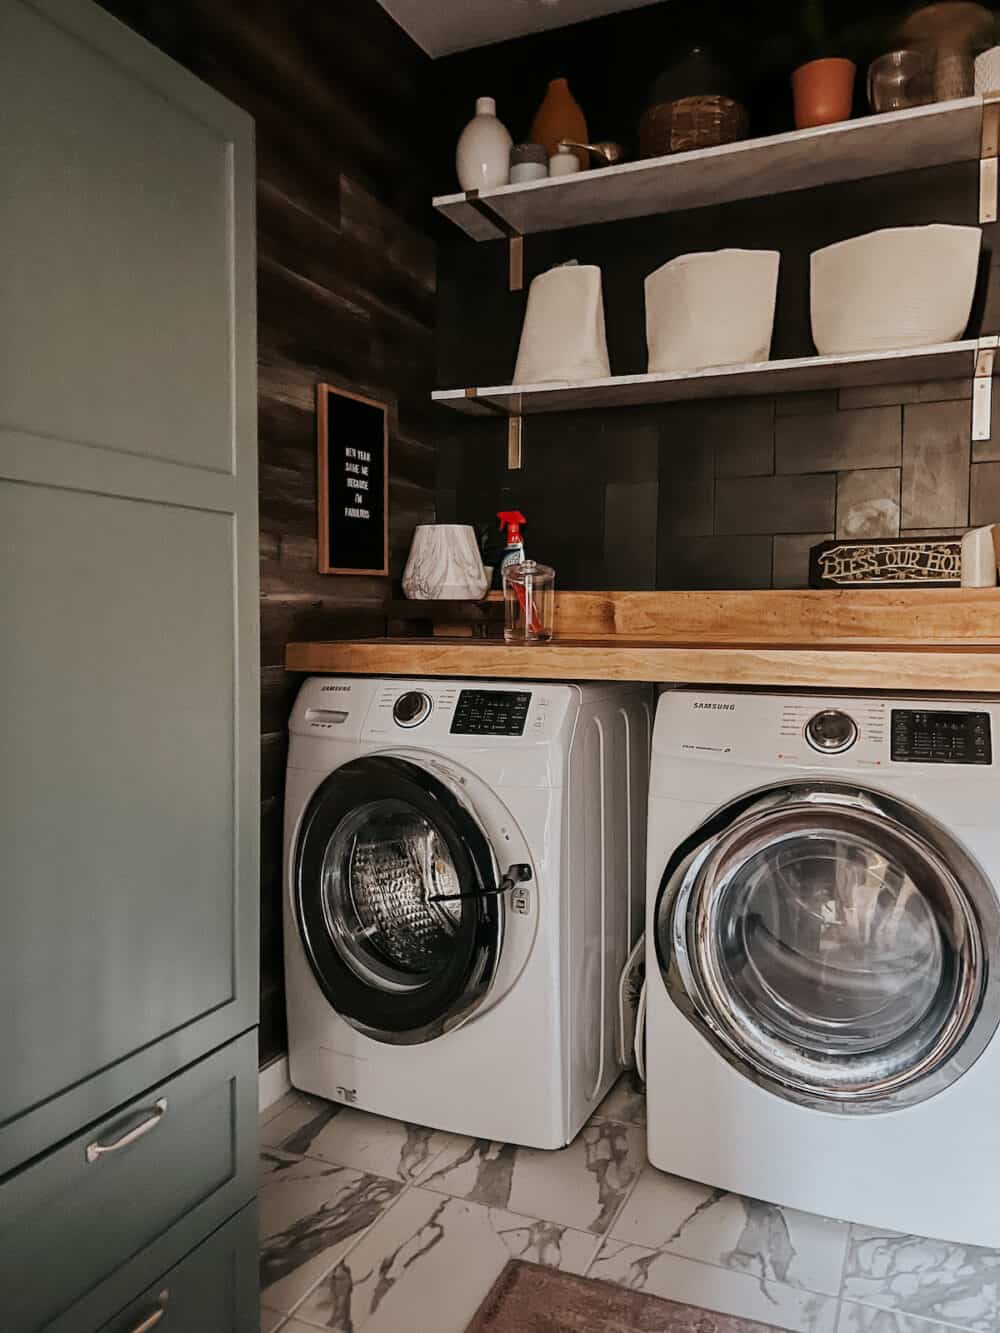 laundry room with a large green cabinet and front load washer and dryer. Washer is propped open with a washer door prop. 